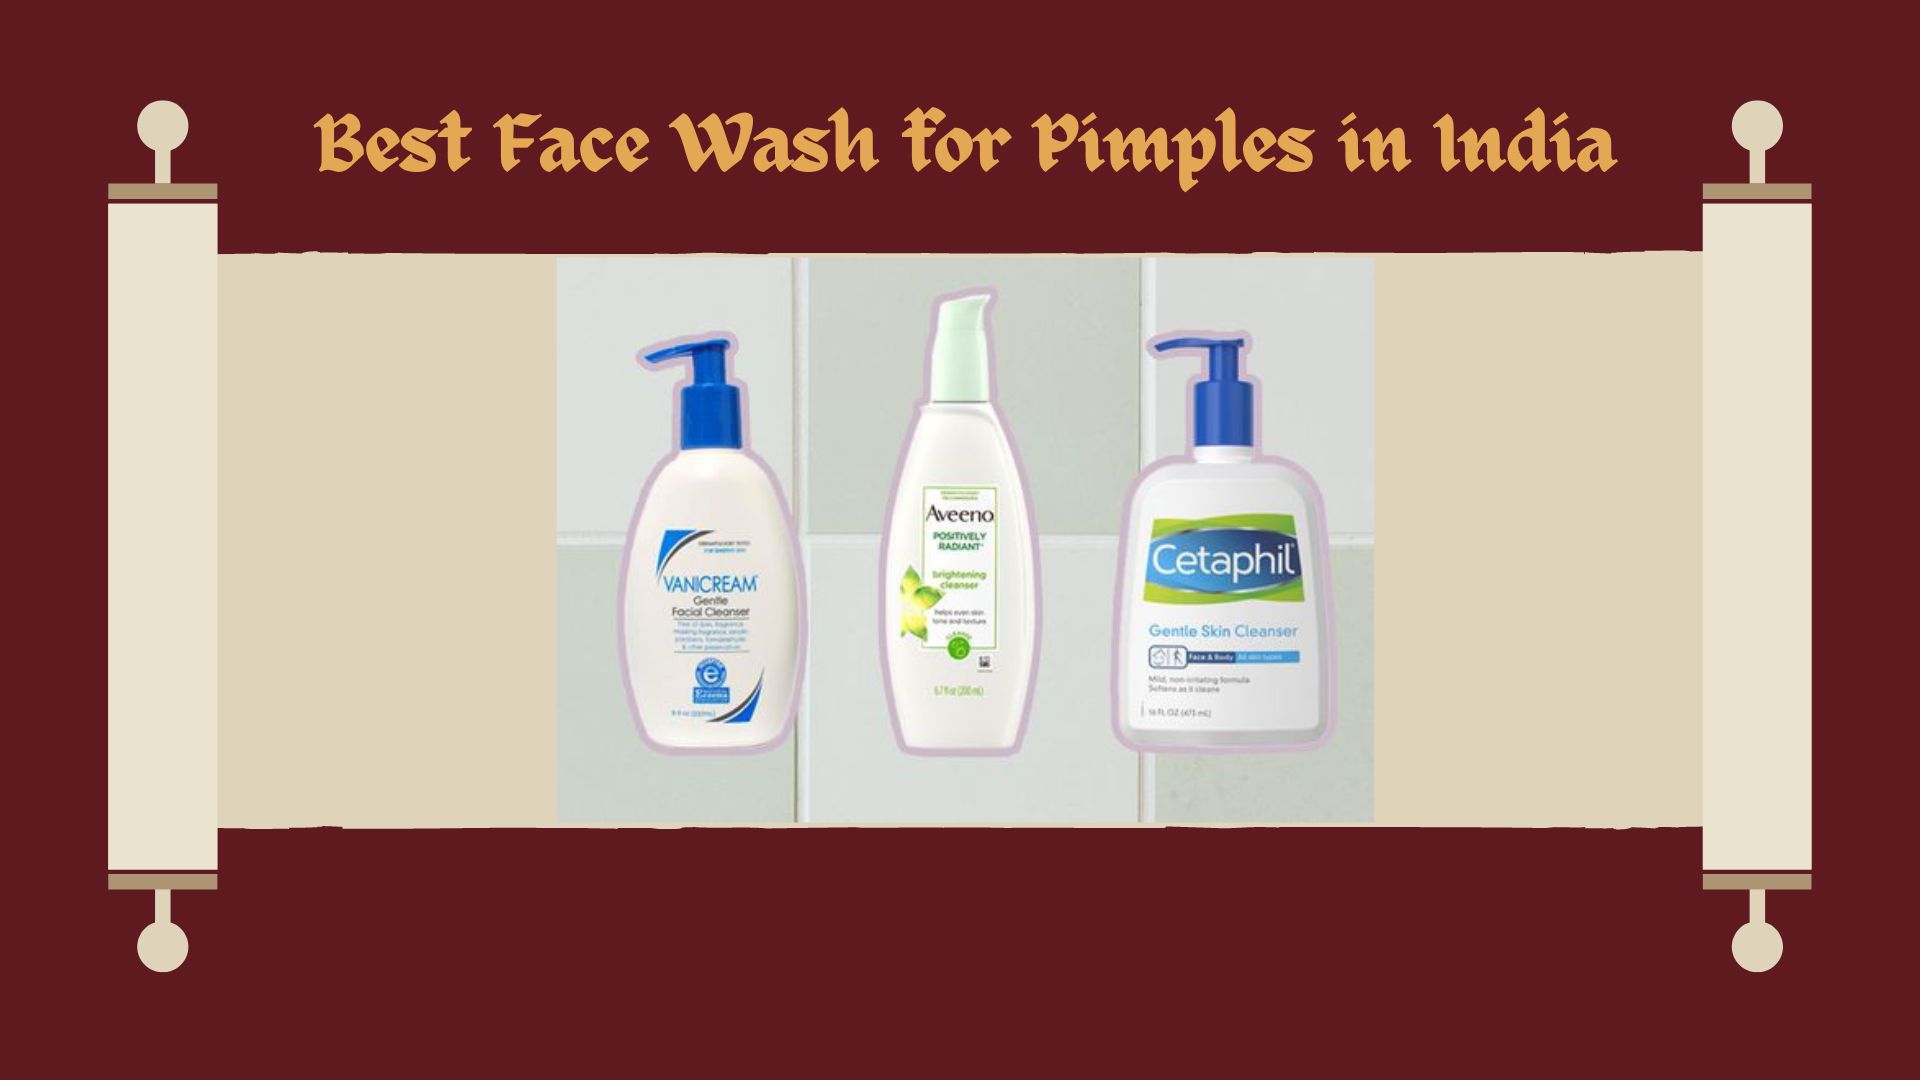 9 Best Face Wash for Pimples in India